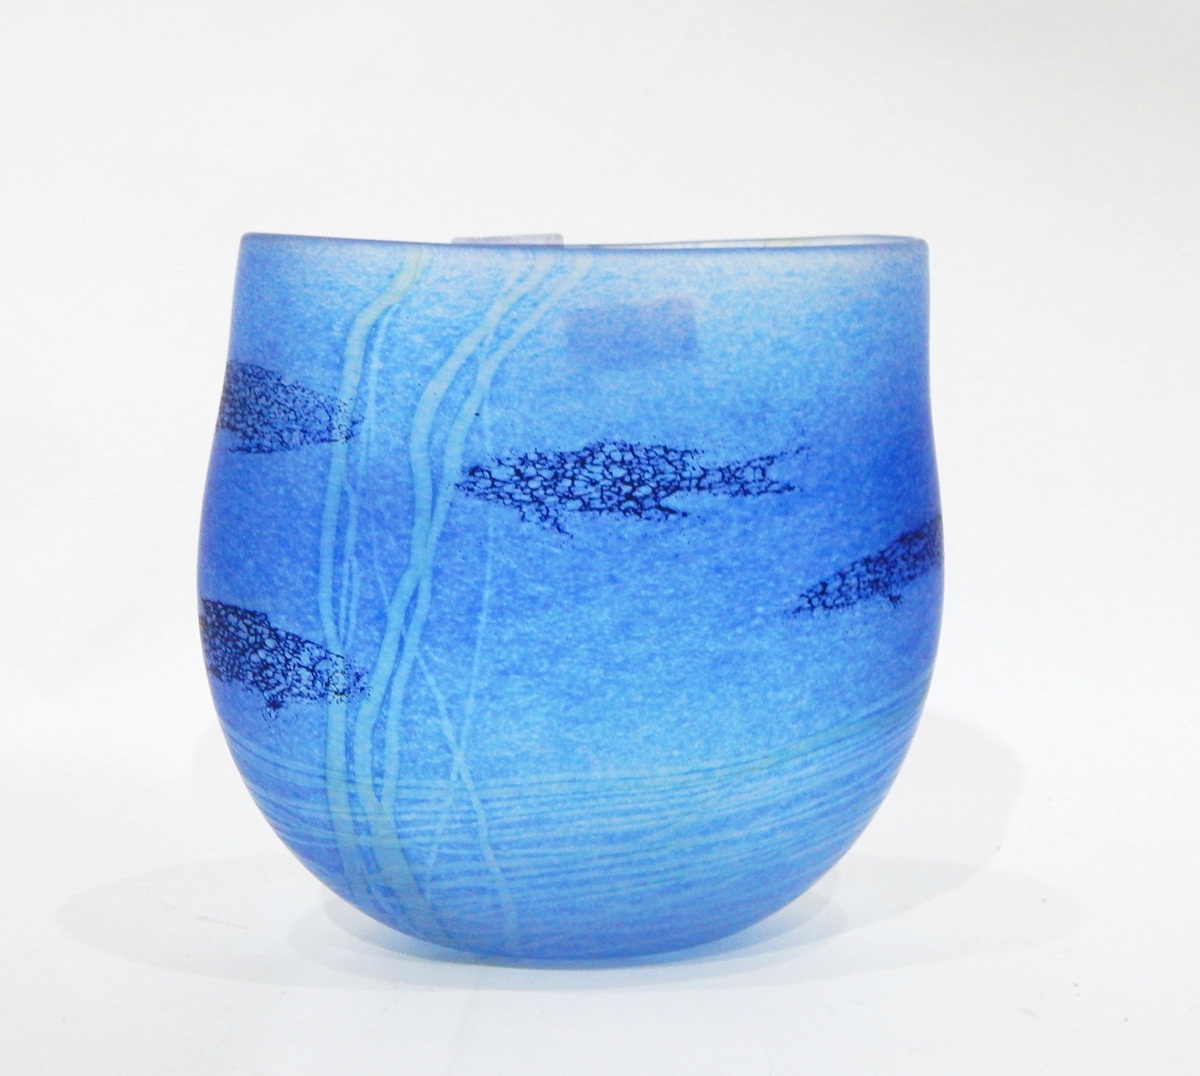 Modern glass vase by Siddy Langley of oval form, decorated with fish and reeds on a blue ground,